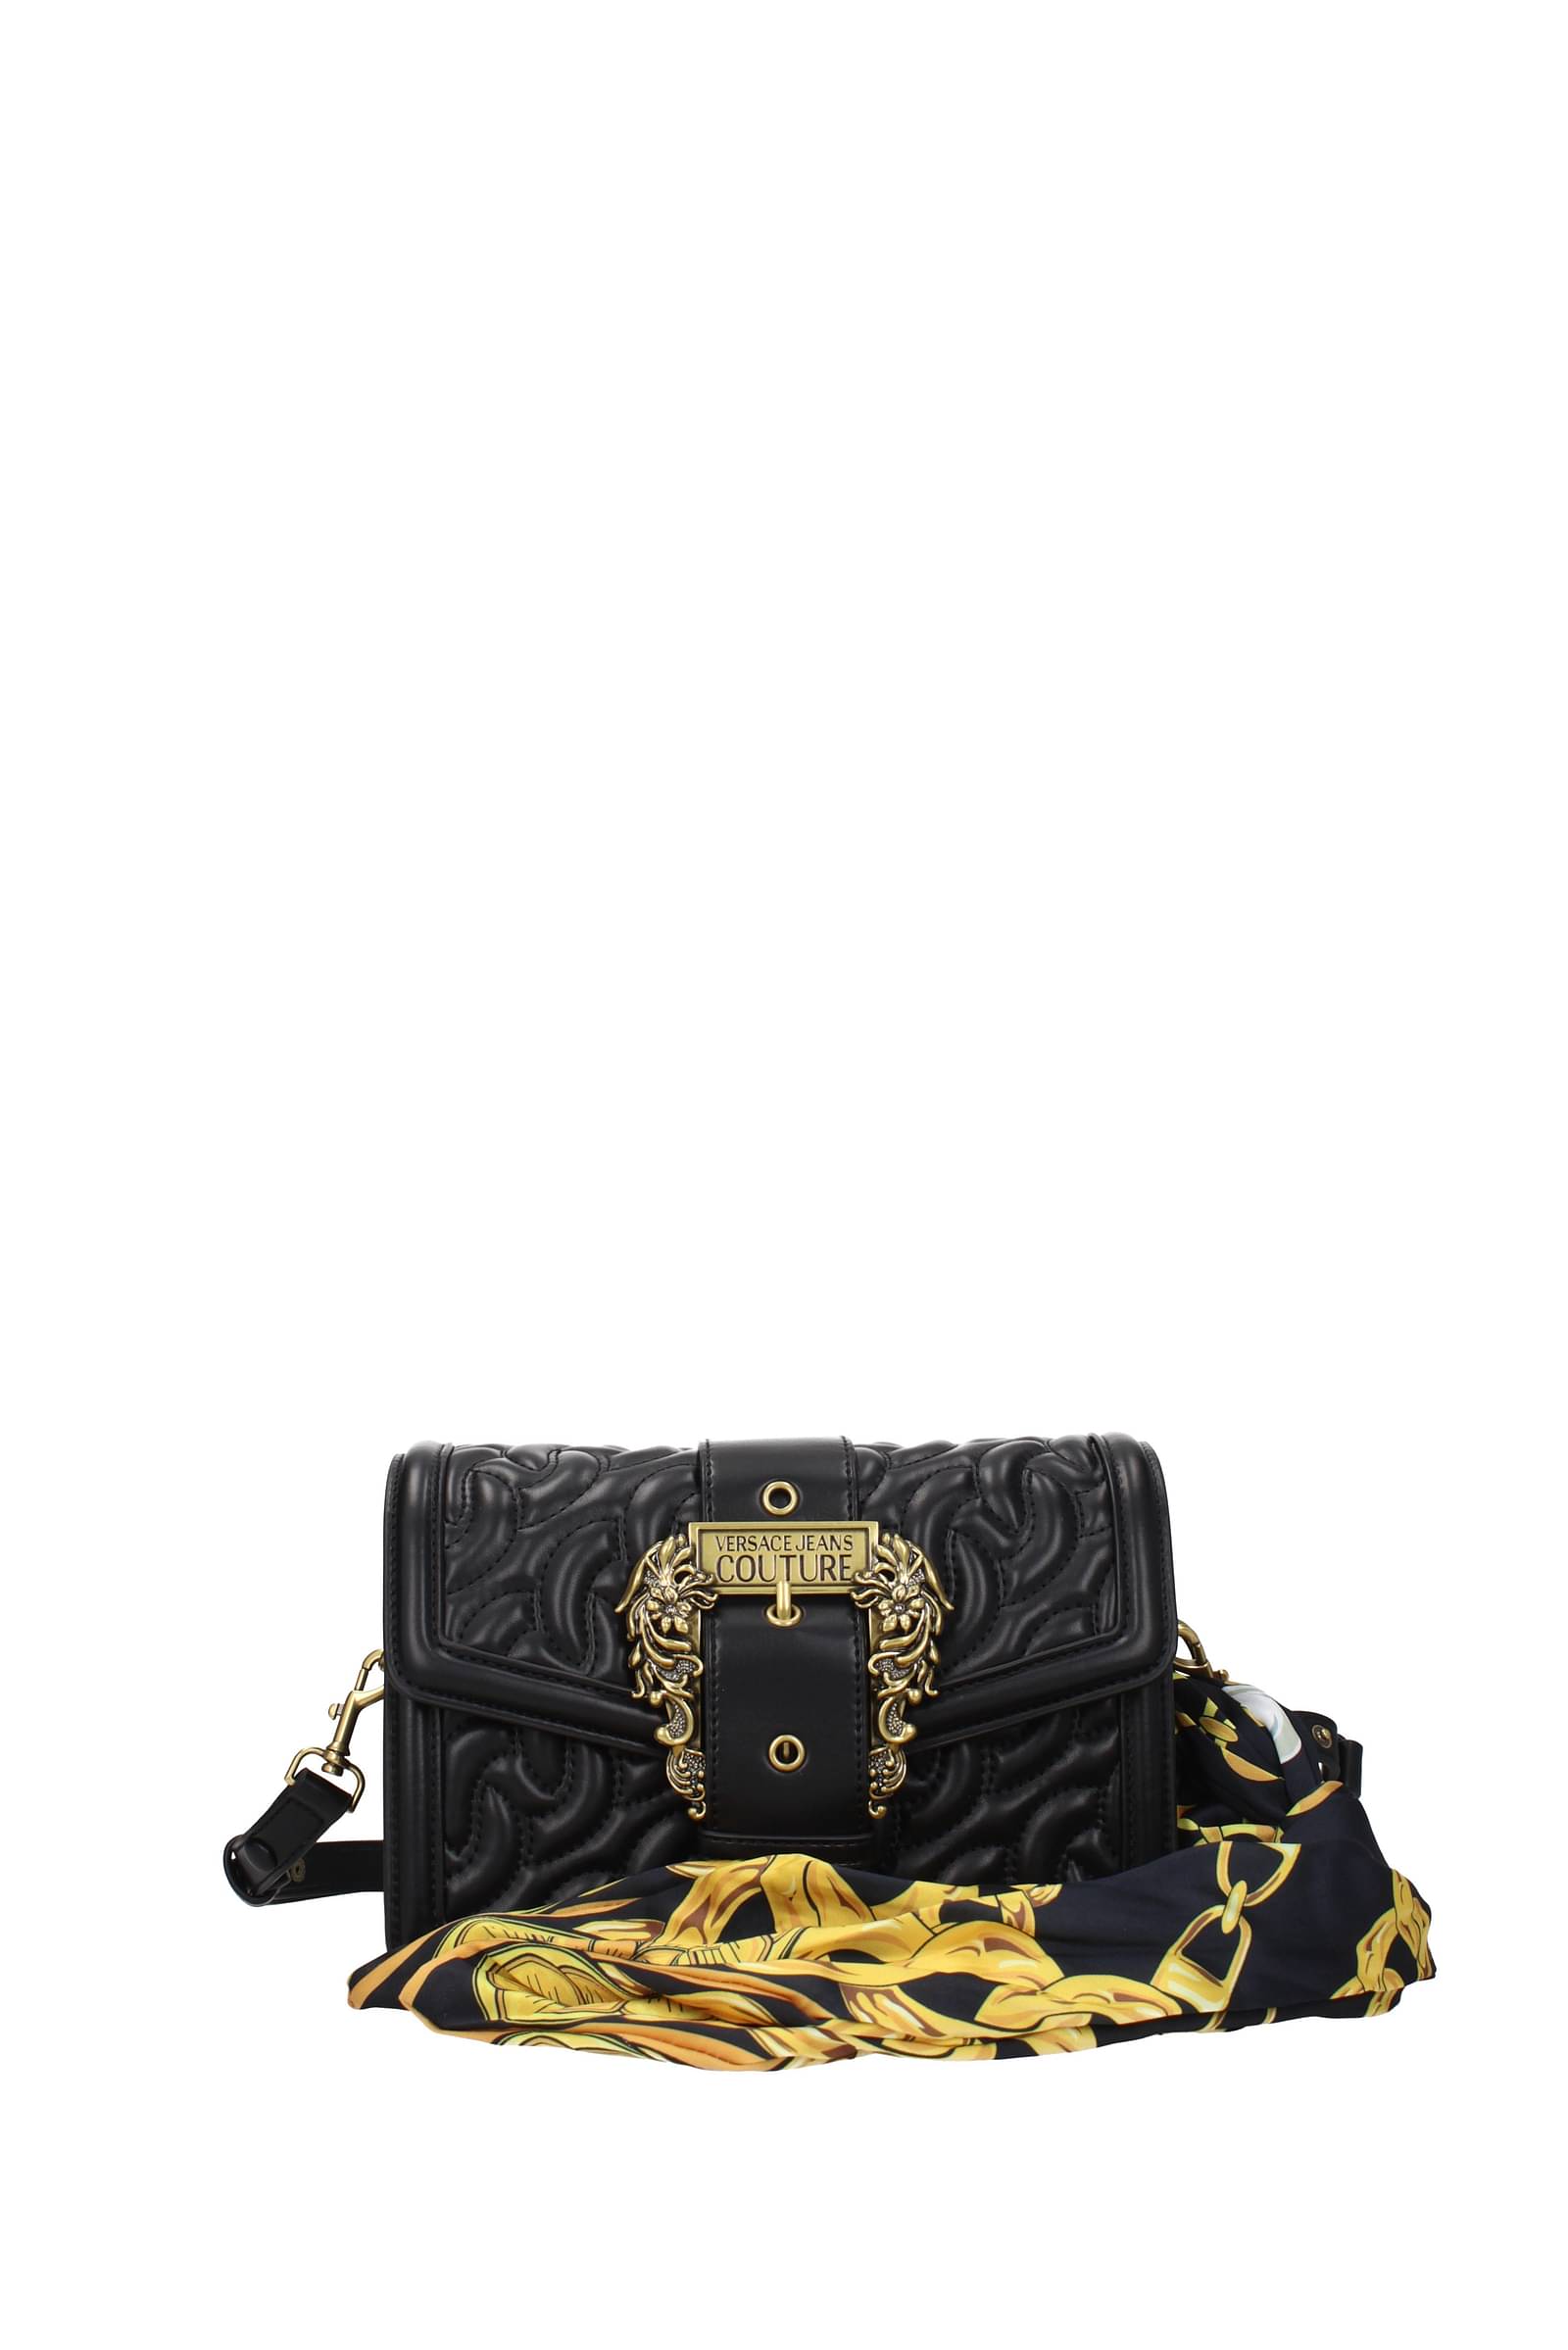 Versace Jeans ショルダーバッグ couture 女性 75VA4BF1ZS803899 ...